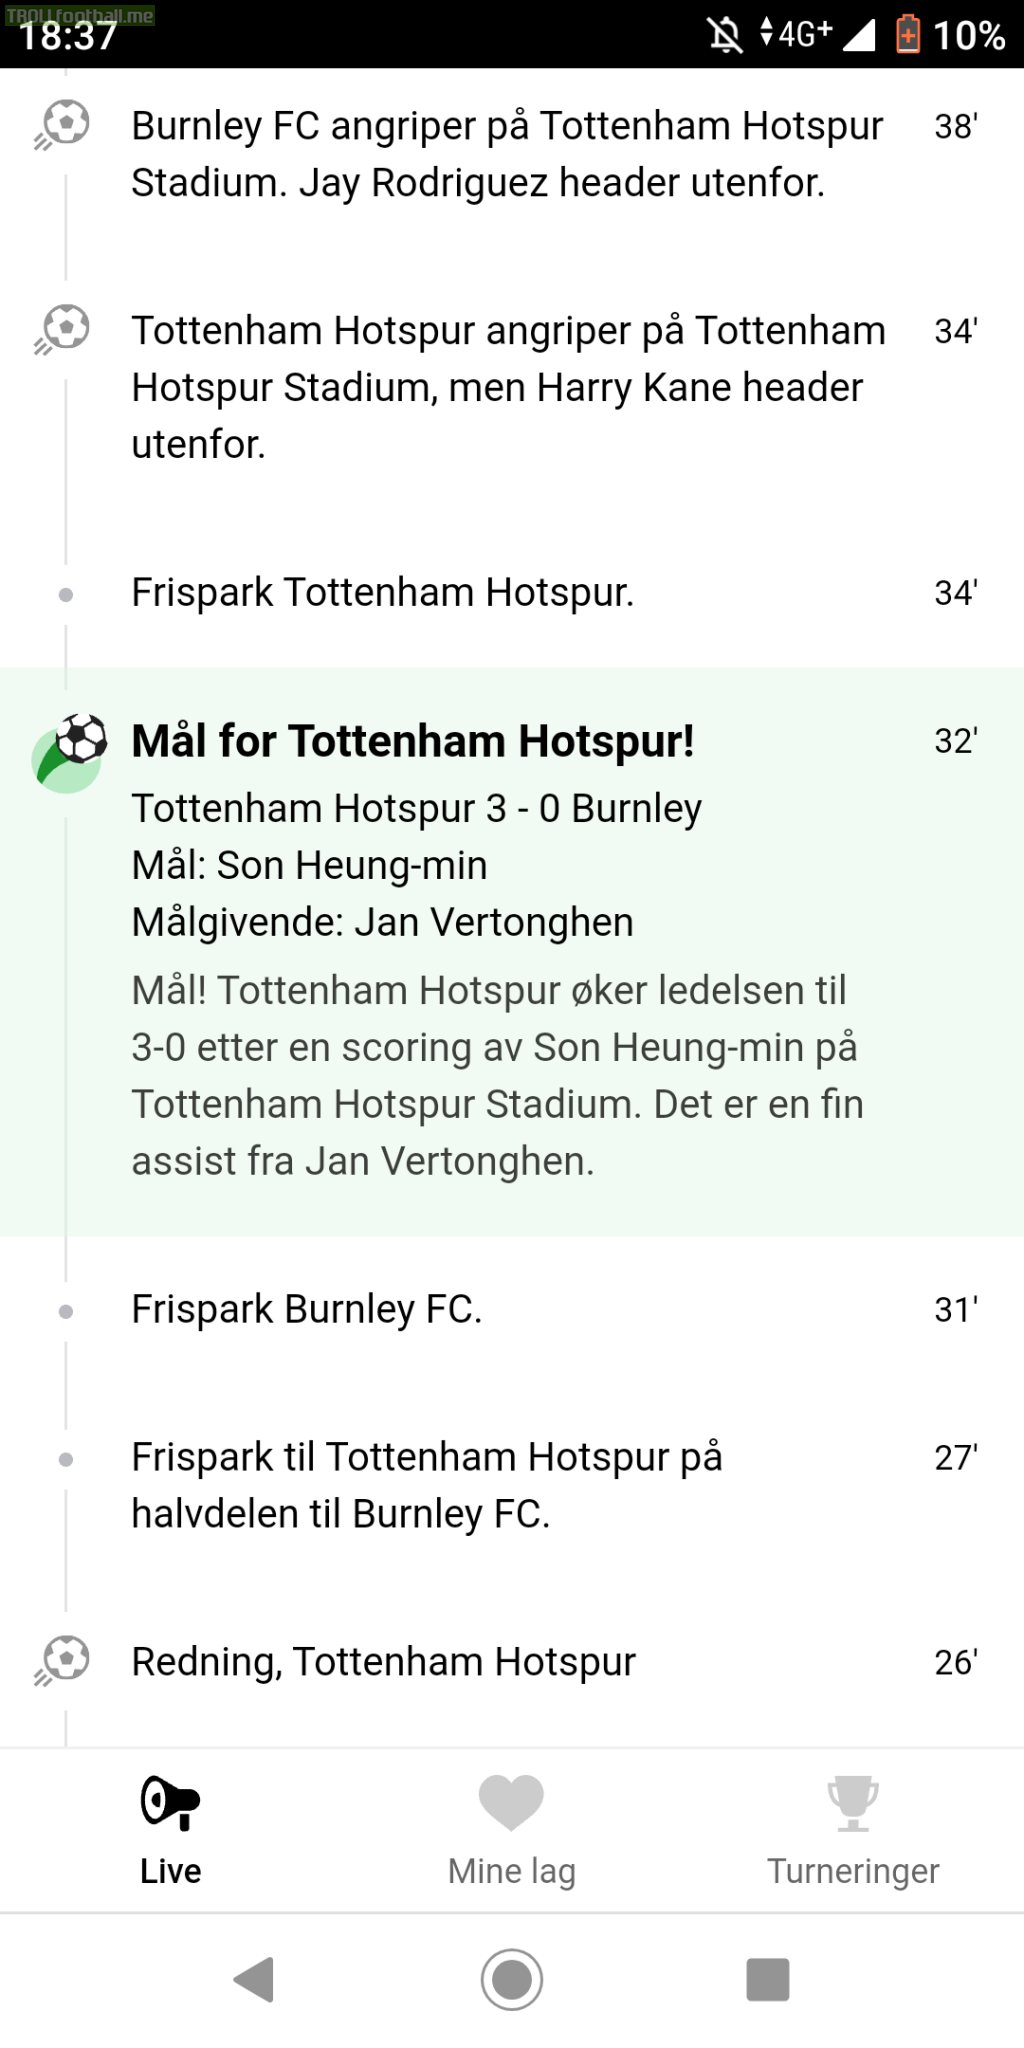 The actual live-feed transcript of Sons 3-0 goal from the biggest newspaper in Norway: Tottenham increases lead as Son scores; nice assist by Vertonghen.